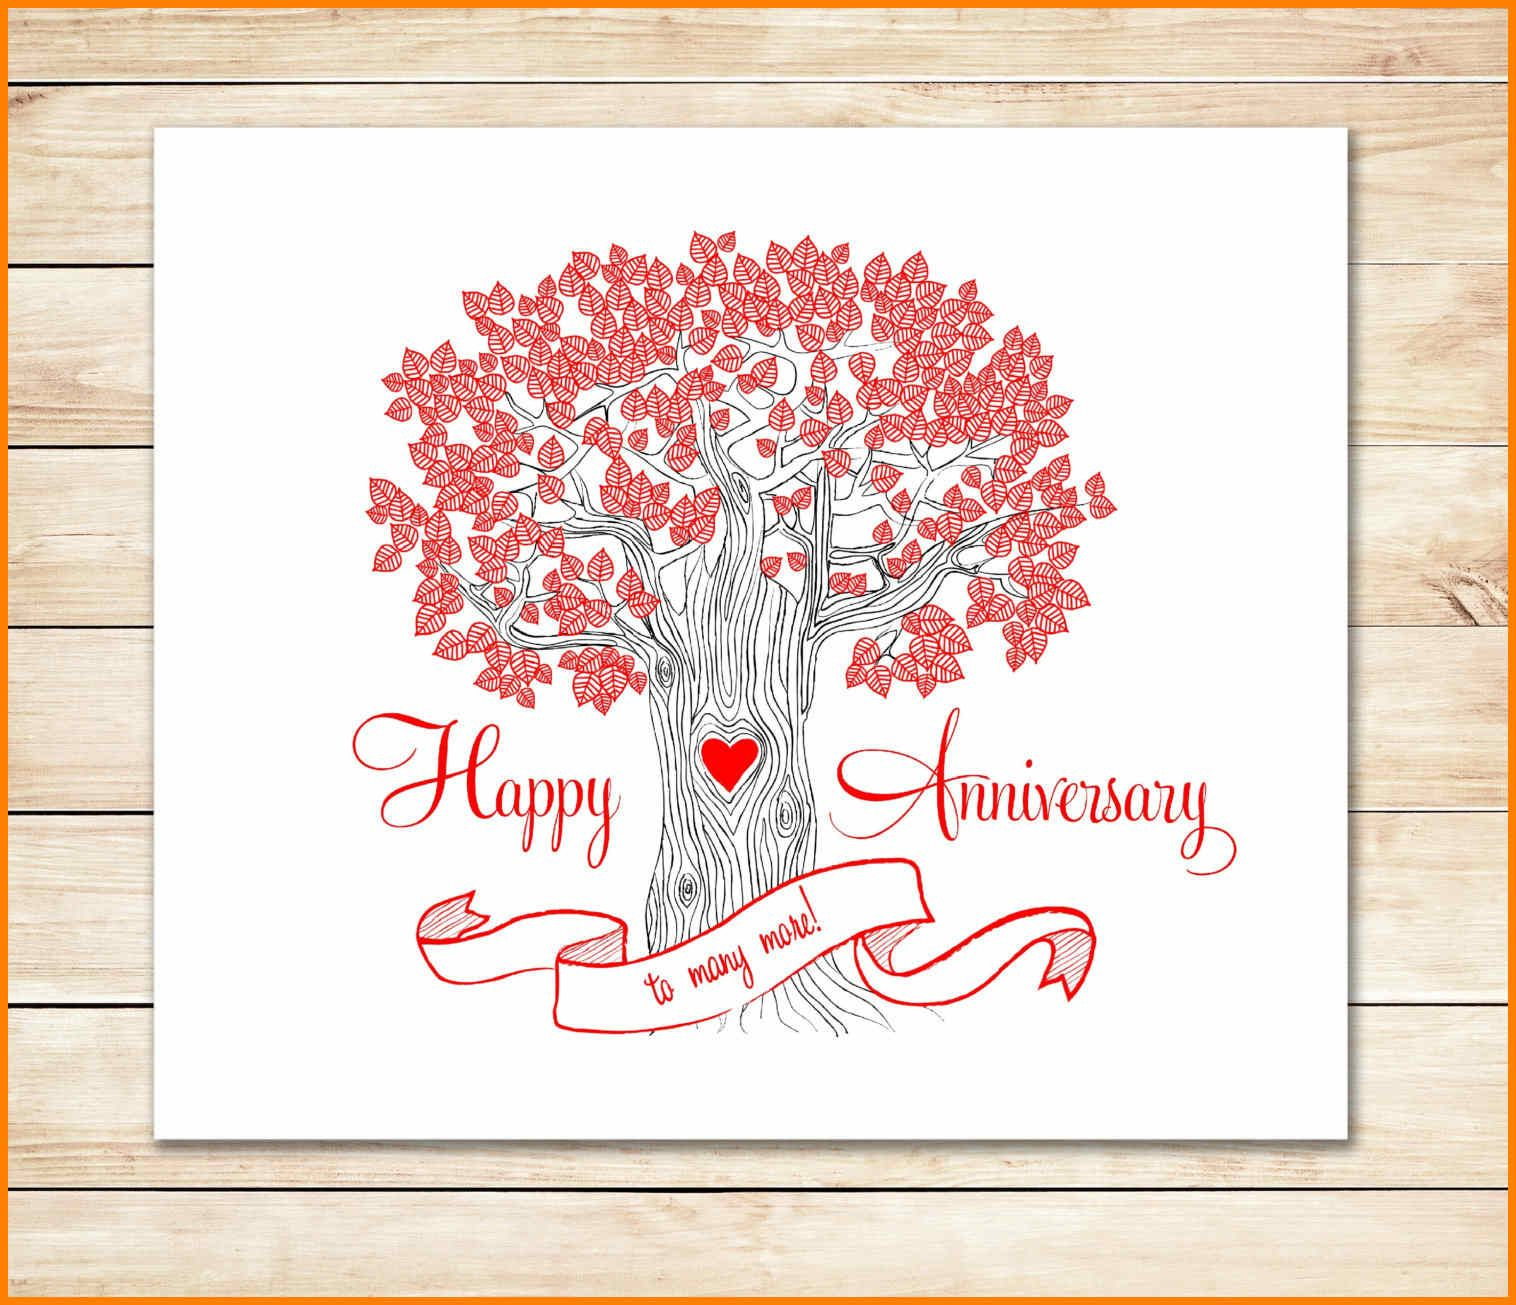 8+ Happy Anniversary Templates Free | Plastic Mouldings In Word Anniversary Card Template